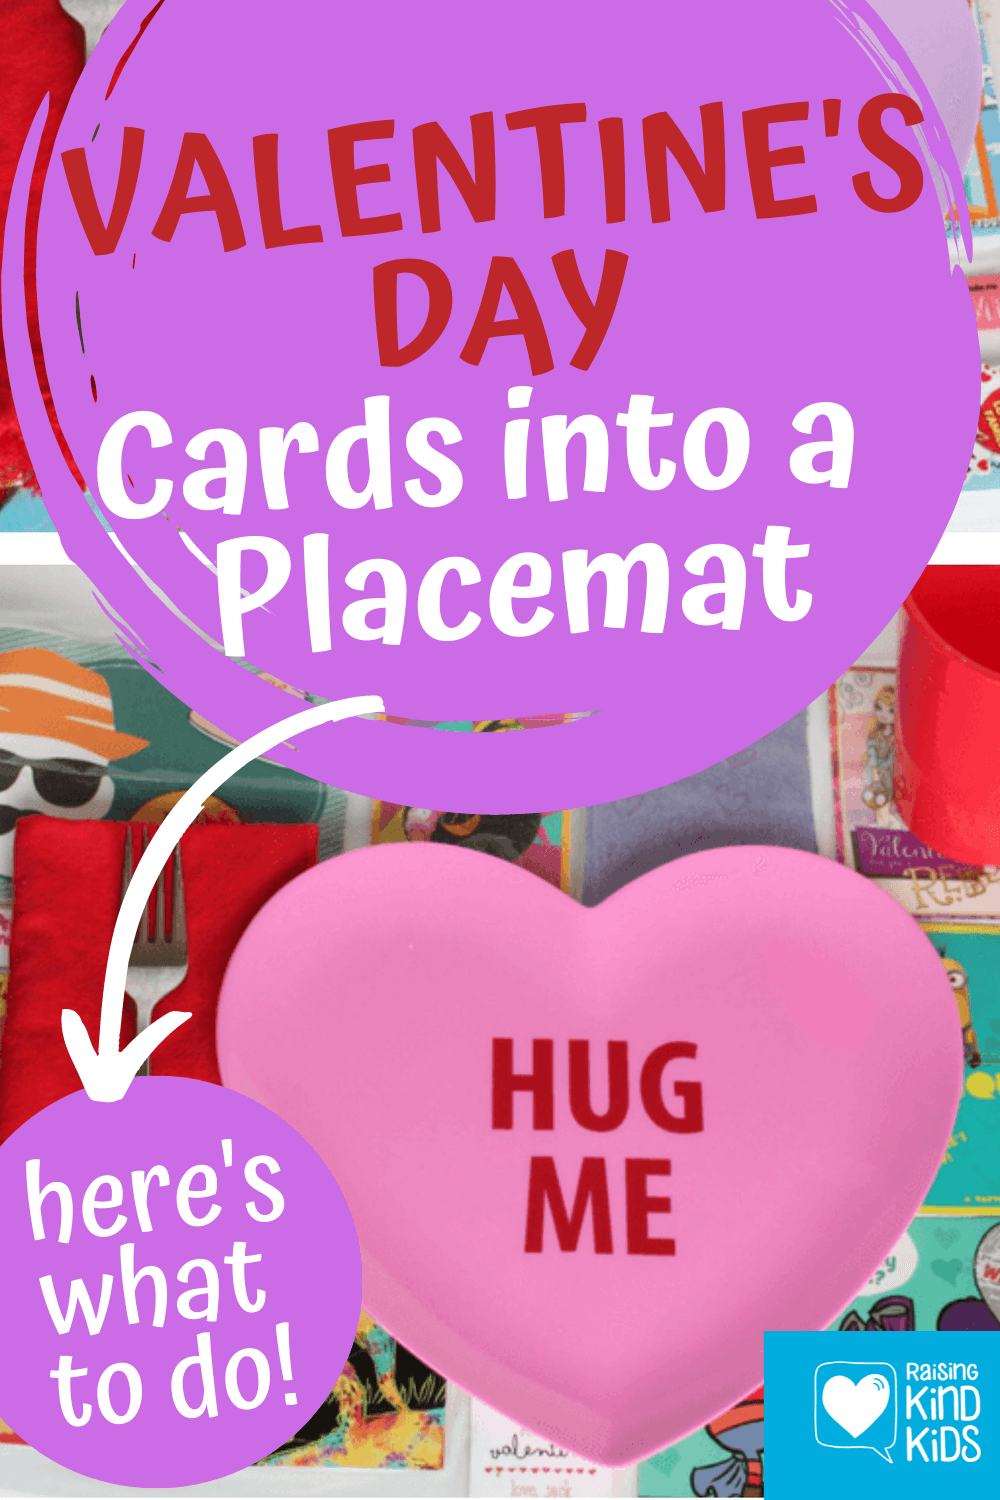 Simple and fun Valentine's Day Craft for kids to reuse their valentine cards they bring home from school. Keep on celebrating Valentine's Day with this cute placemat craft for kids. #valentinesday #valentinesdaycraft #valentinesdaycraftforkids